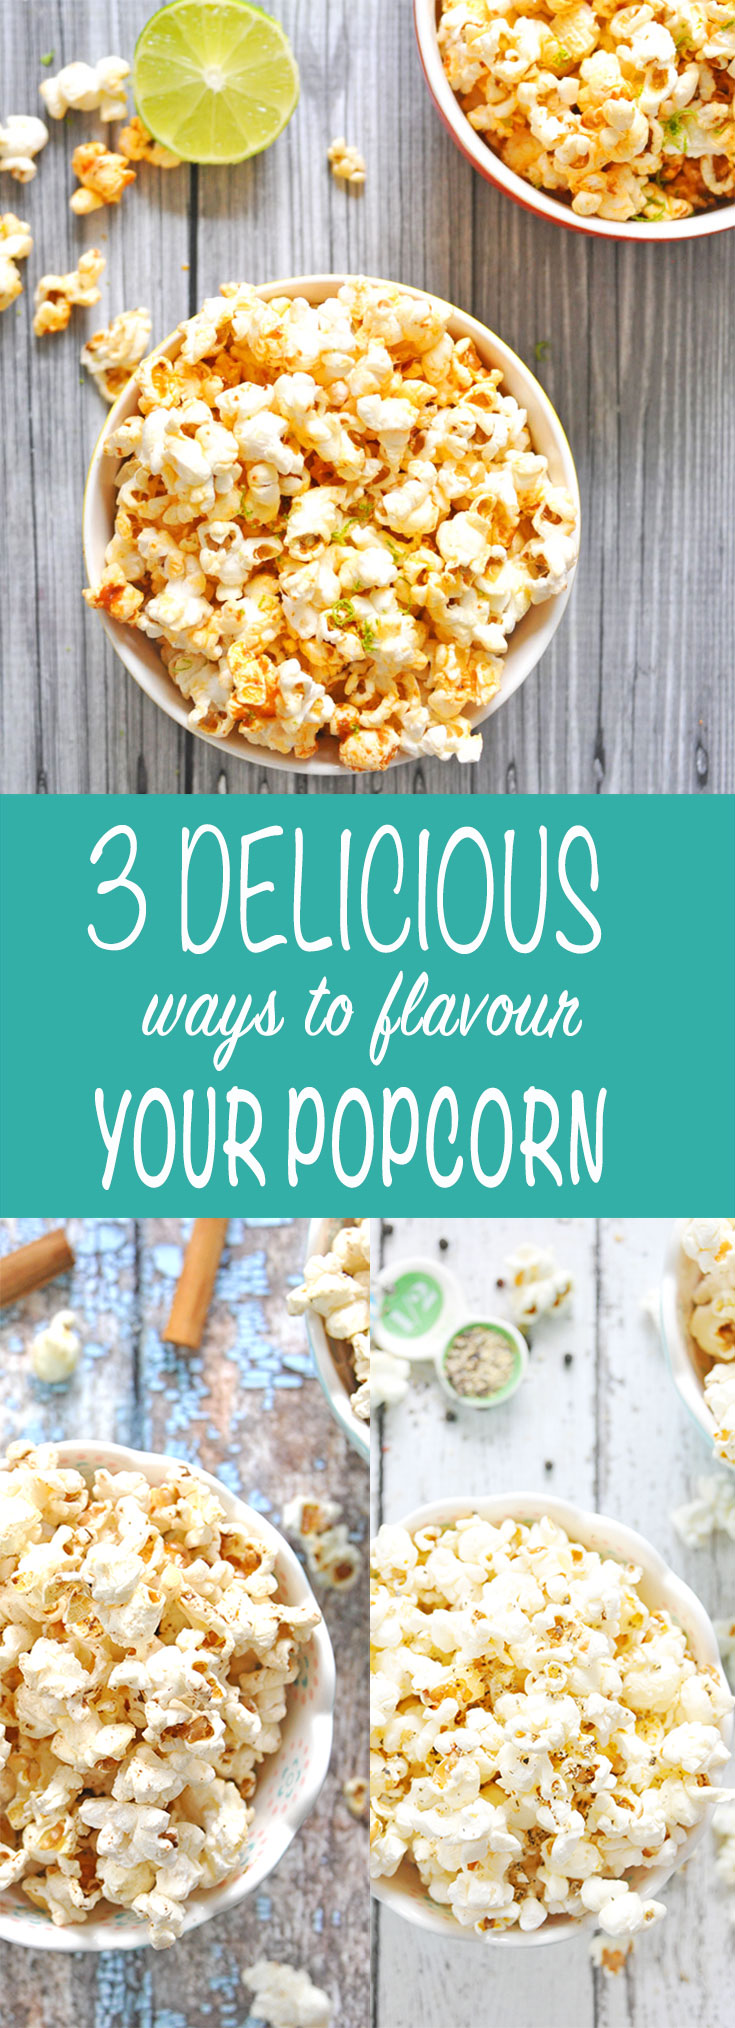 3-DELICIOUS-WAYS-TO-FLAVOUR-YOUR-POPCORN-PINTEREST